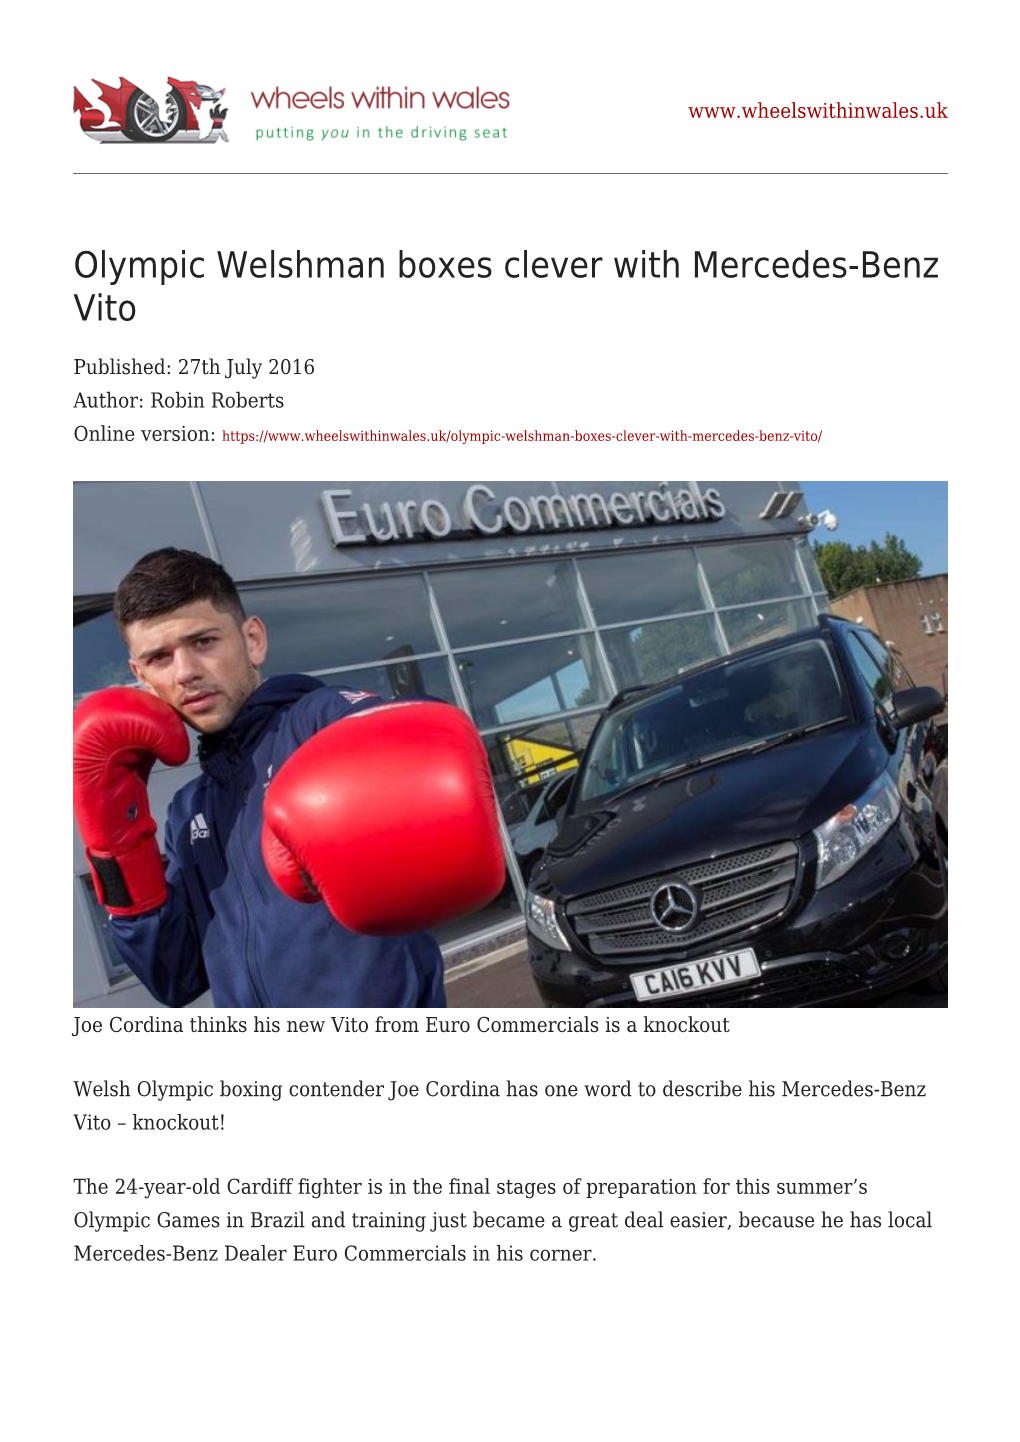 Olympic Welshman Boxes Clever with Mercedes-Benz Vito